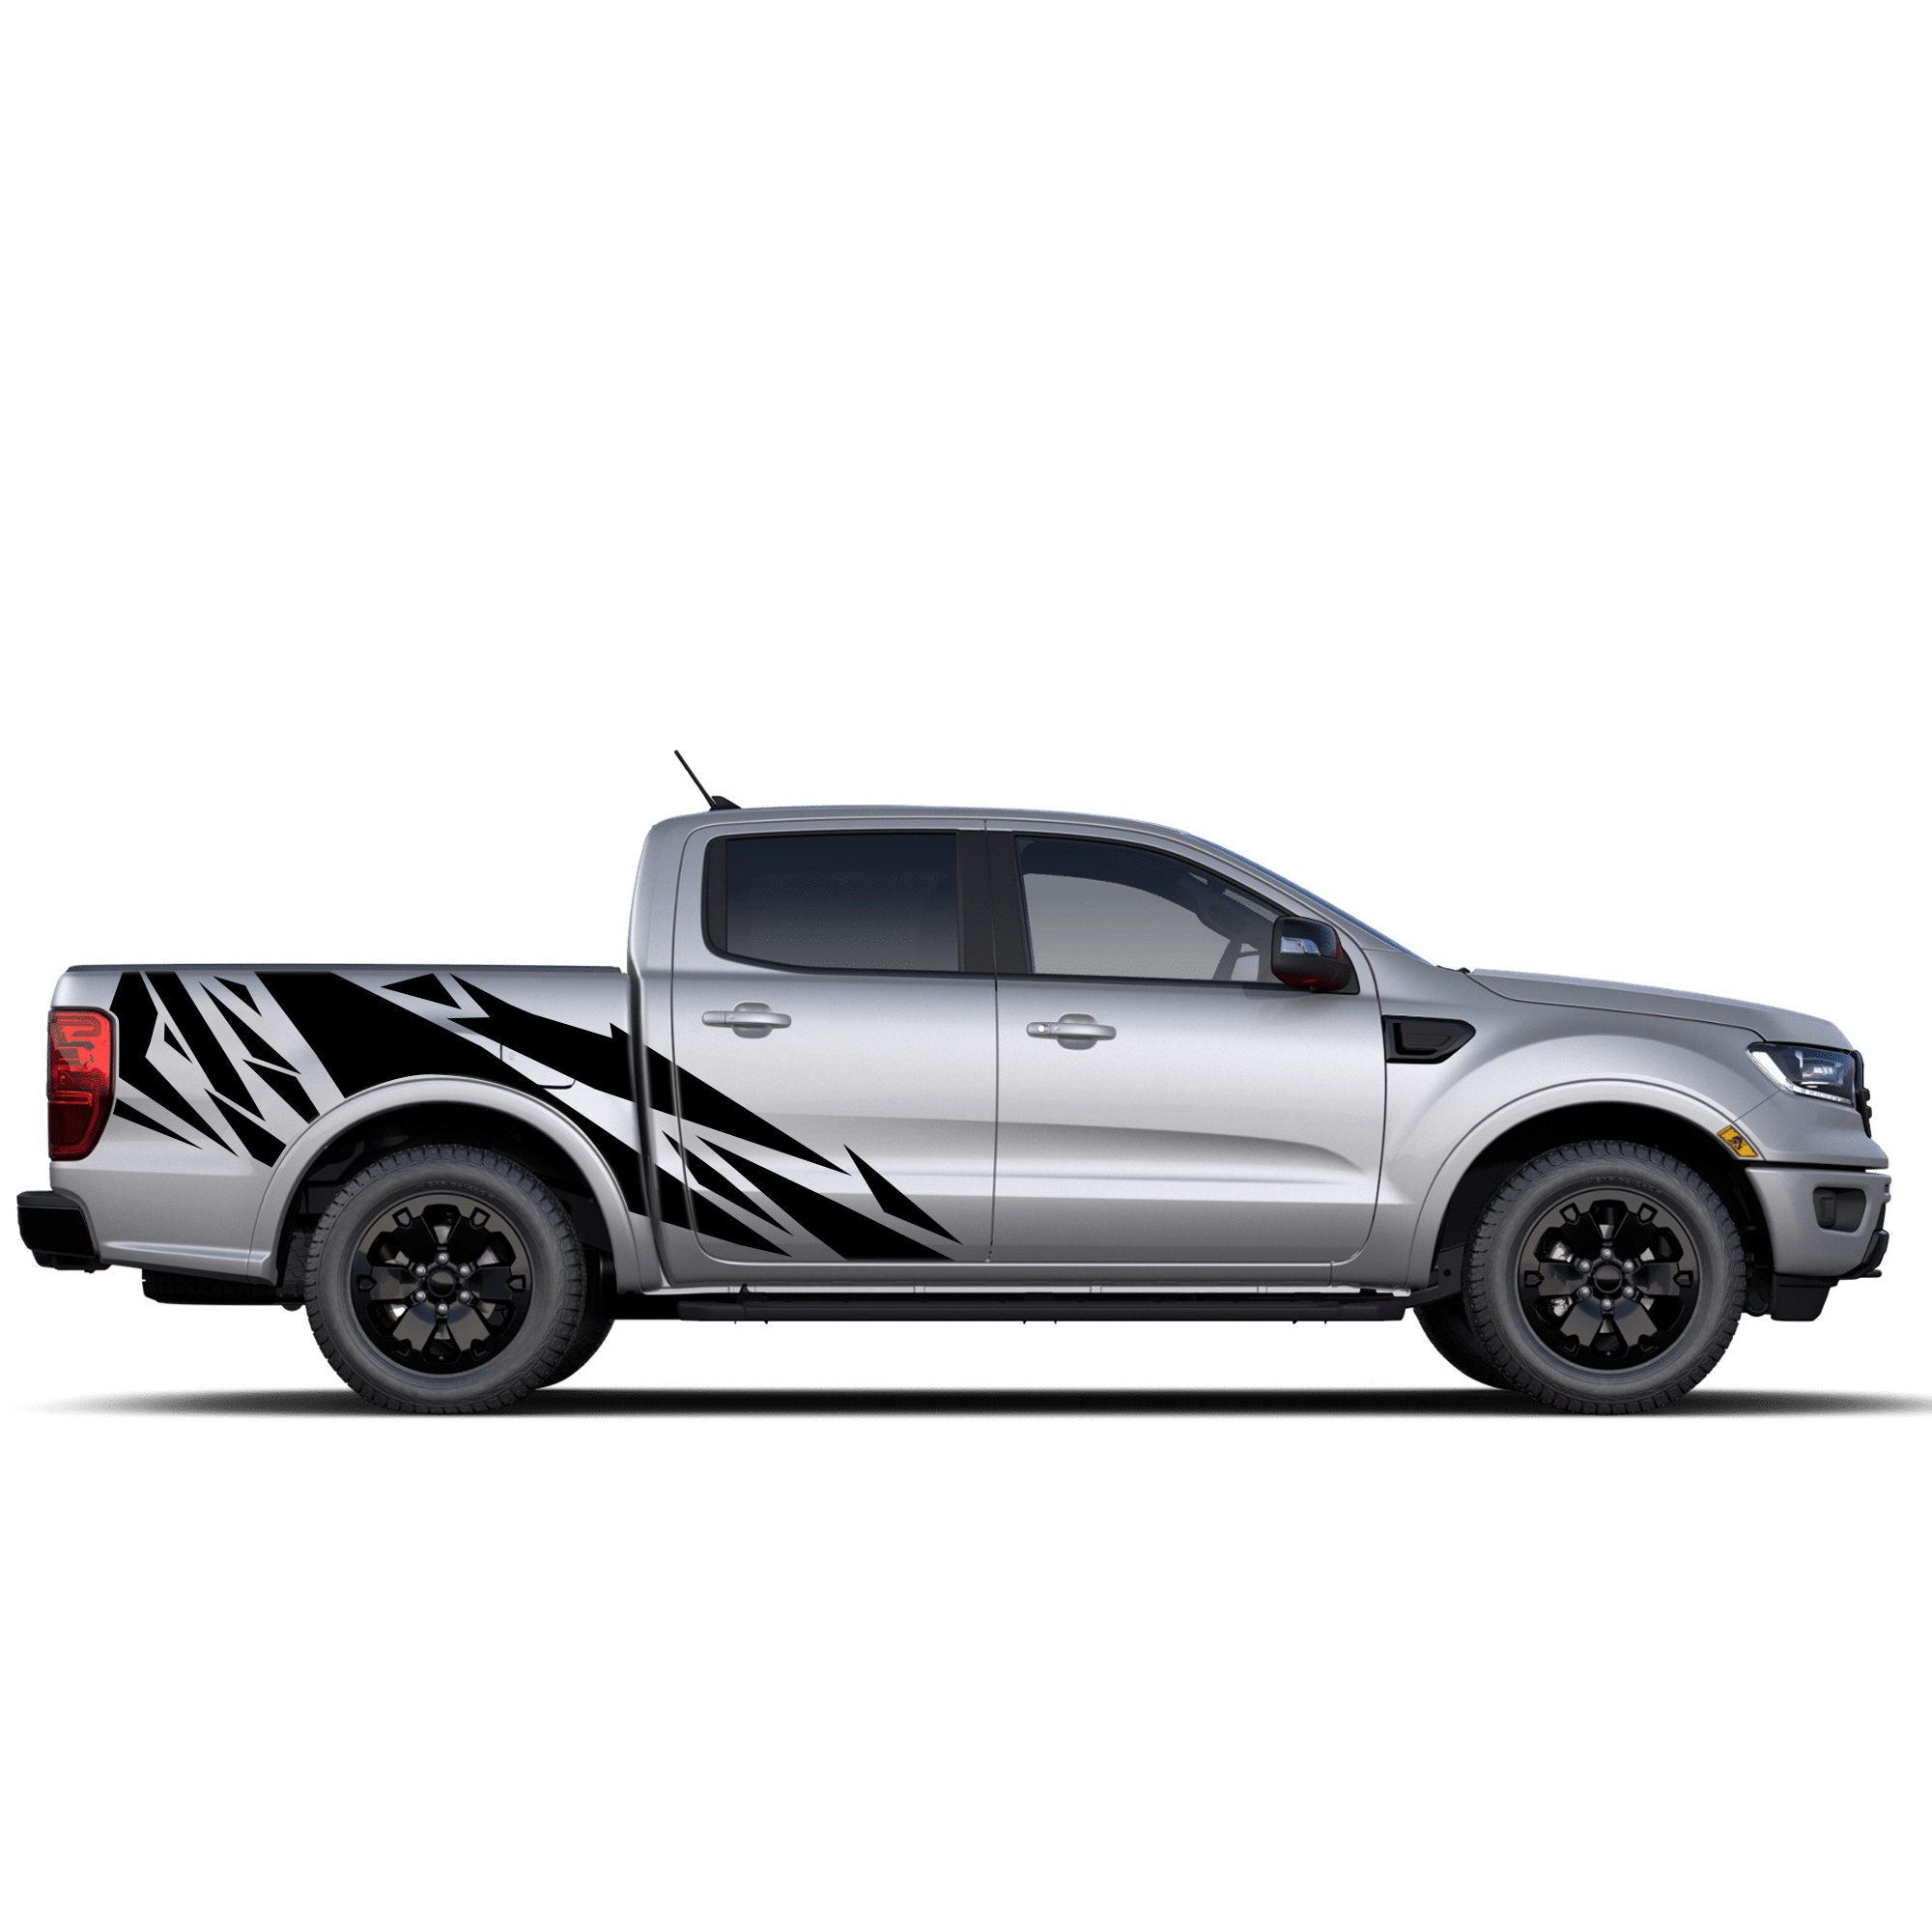 Kit stickers autocollant damier 117 cm FORD RANGER FORD by XL-Shops